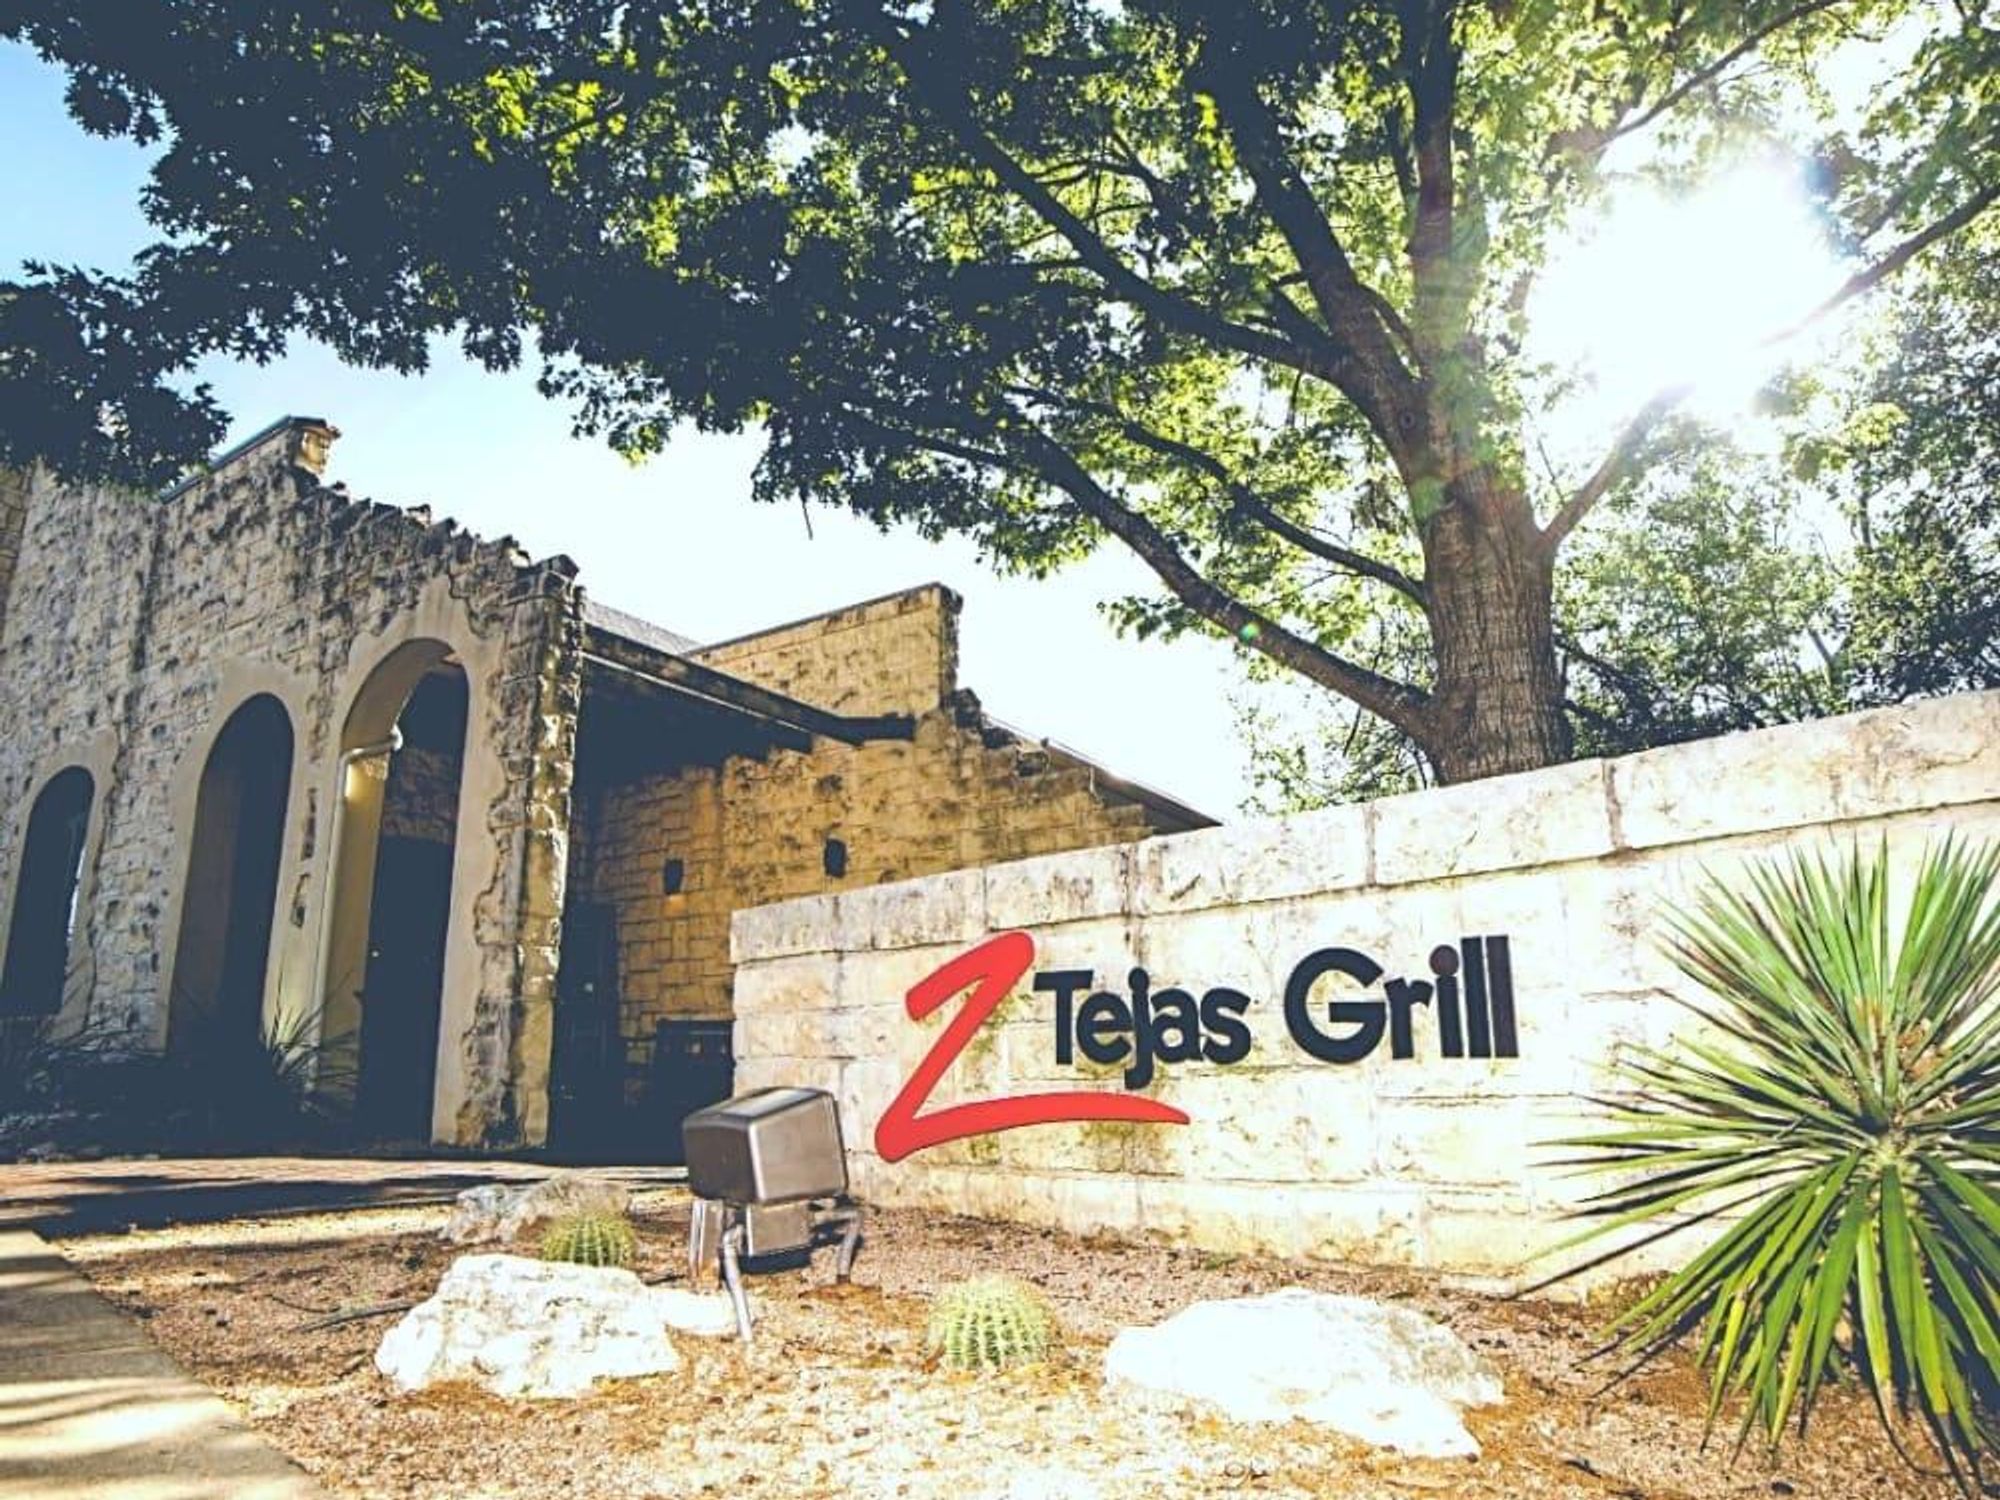 Z'Tejas Grill sign